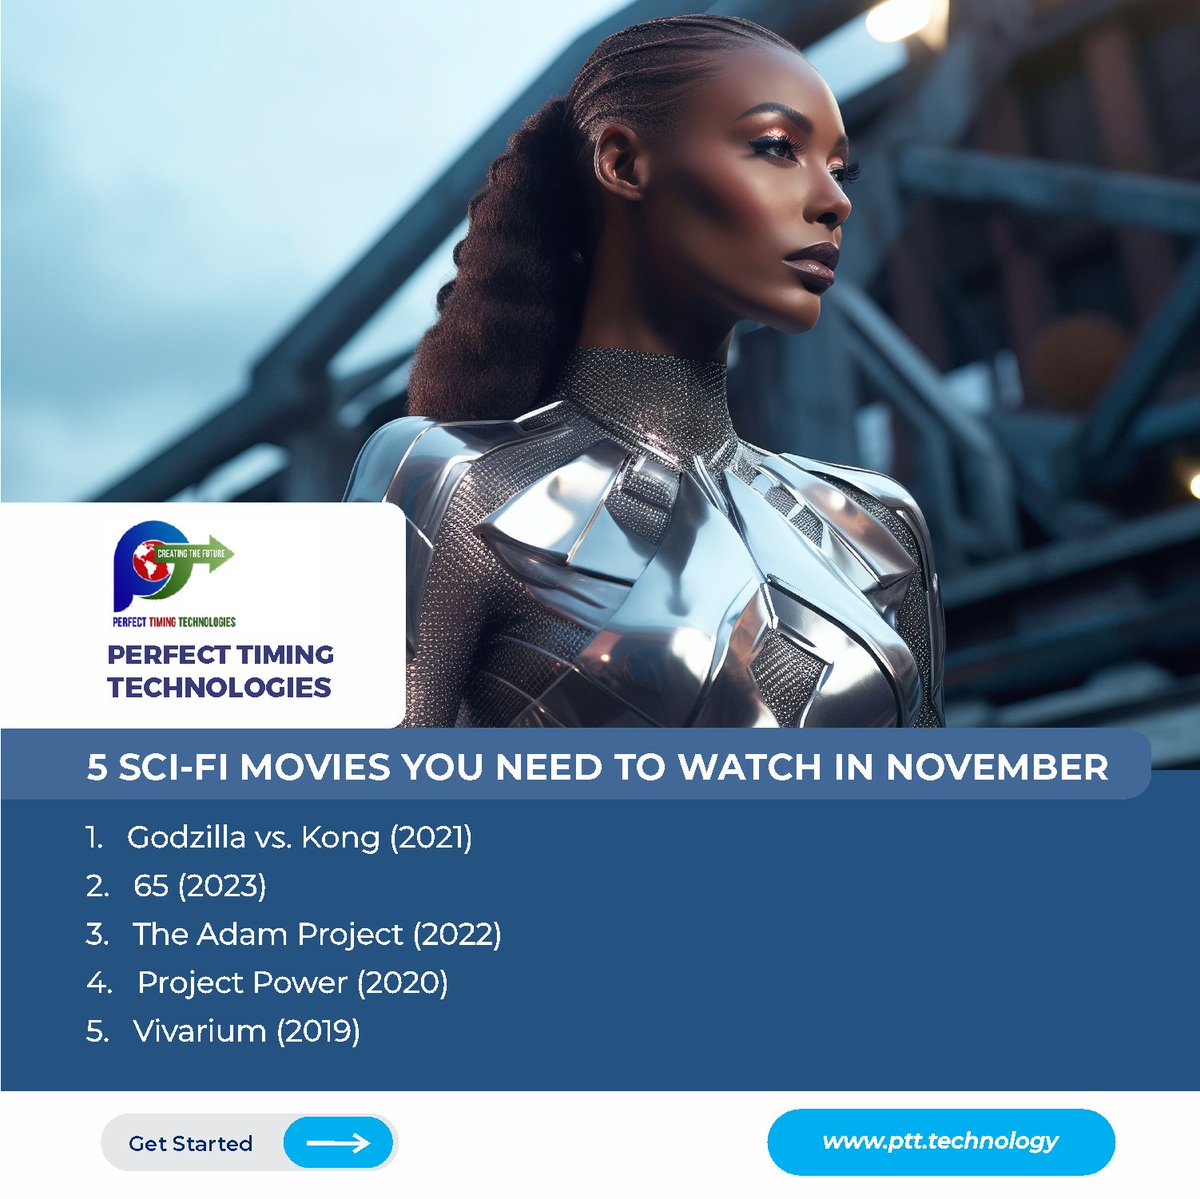 5 sci-fi movies you need to watch in November
 
READ HERE: digitaltrends.com/movies/watch-n…

#SciFiMovies #MovieRecommendations #MustWatch #NovemberMovies #NetflixMovies #FilmEnthusiast #MovieBuff #PerfectTimingTechnologies #PerfectTimingHolding #EntertainmentPicks #MovieNight #MovieTime